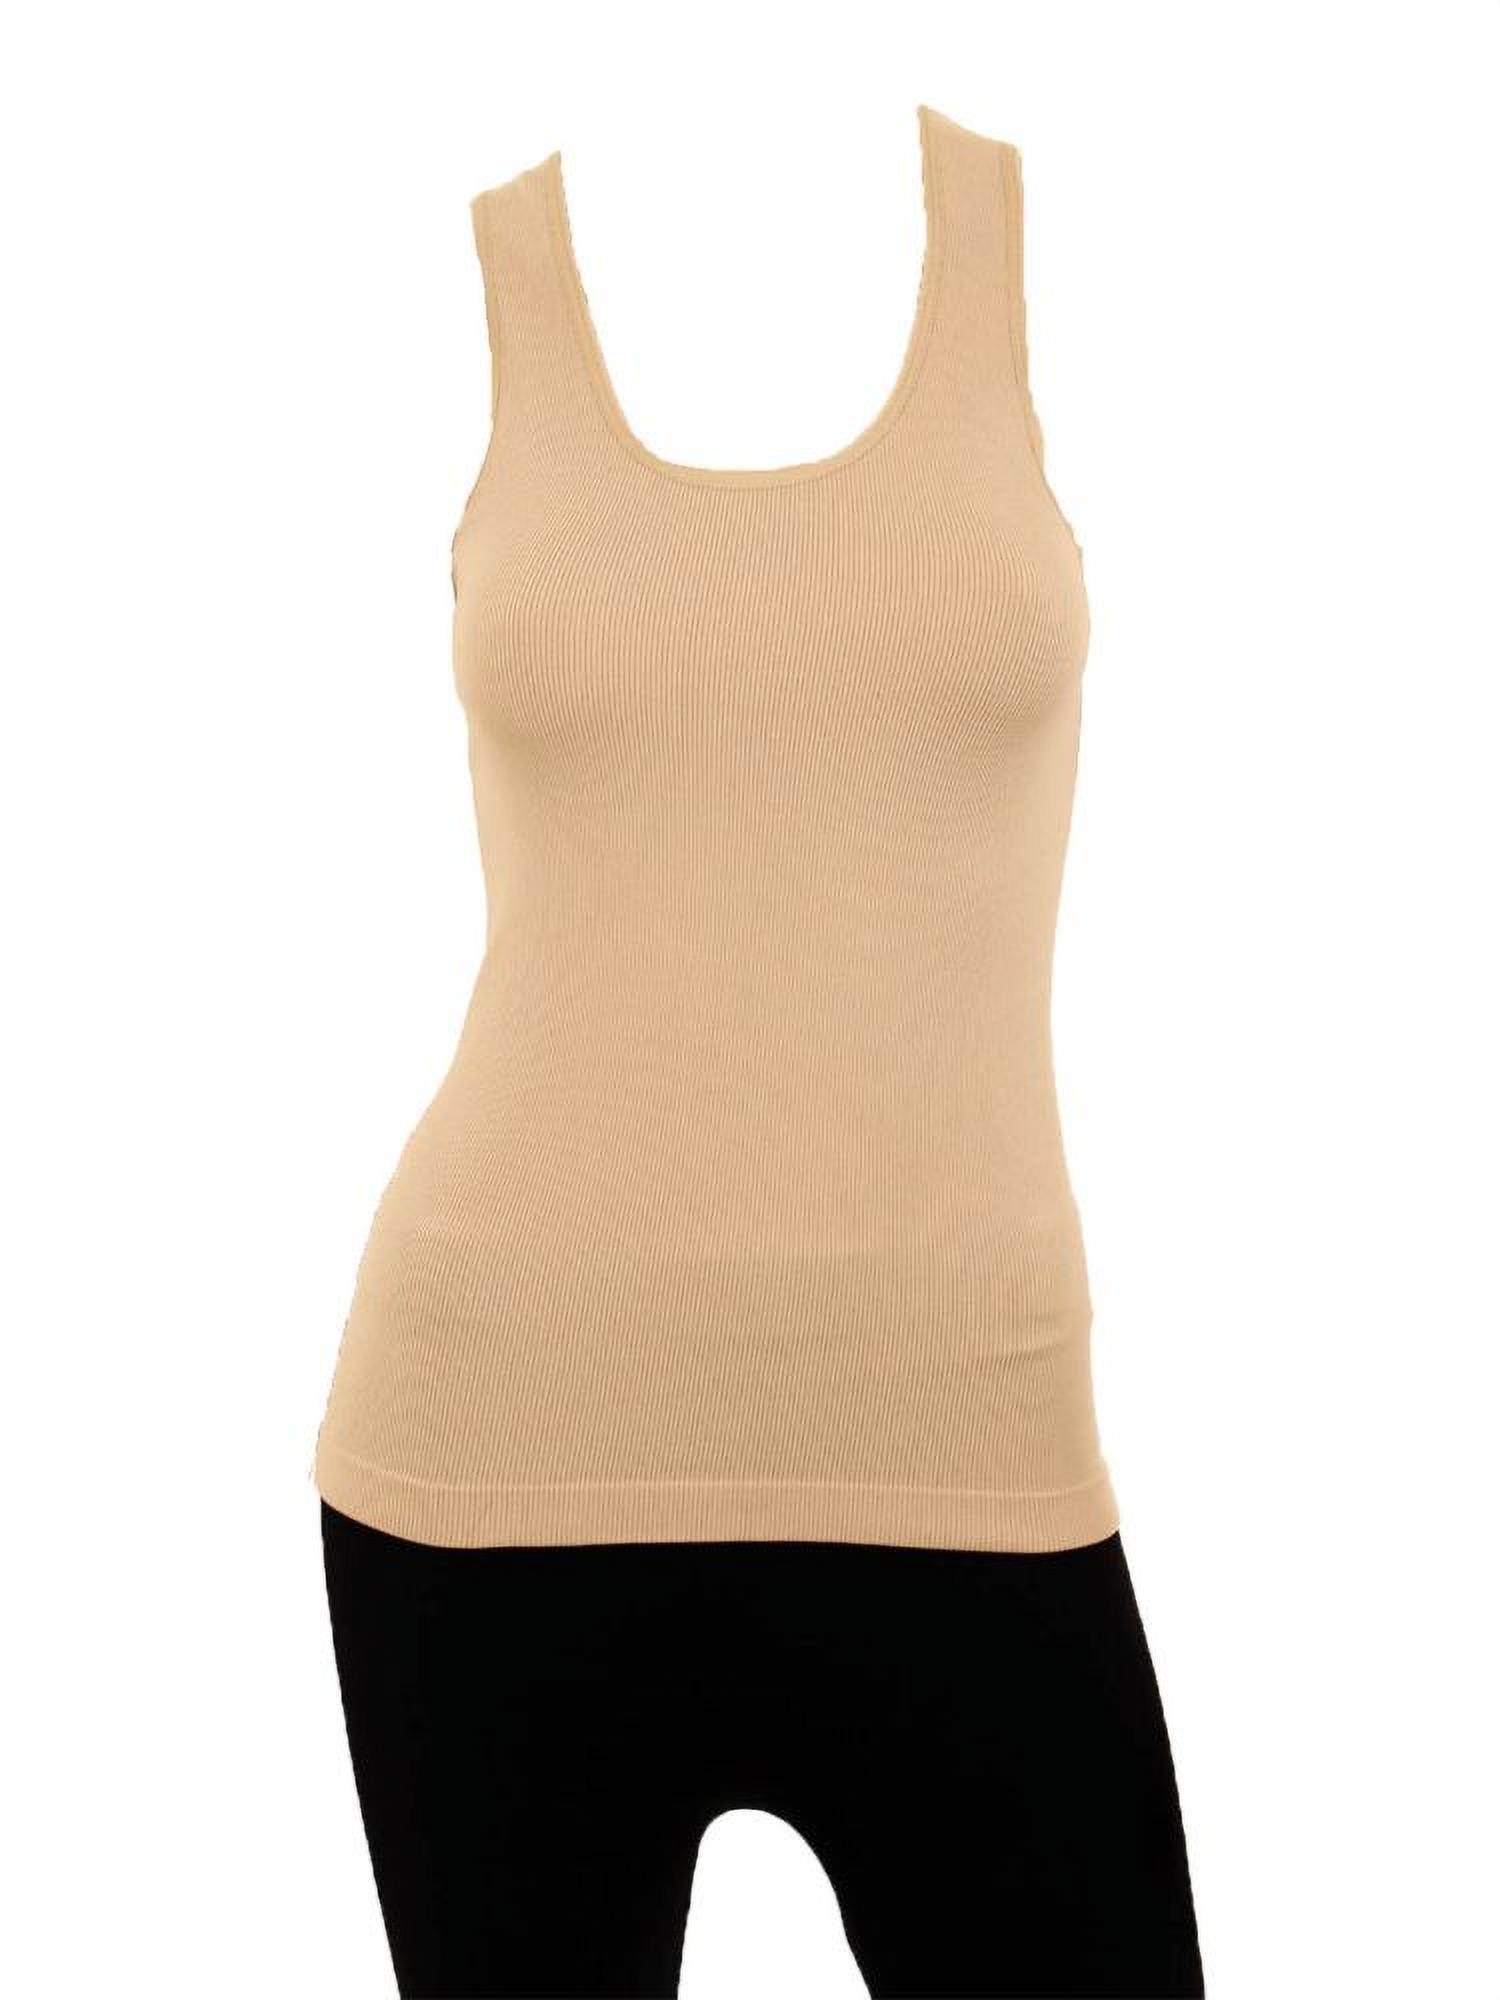 LAVRA Women's Ribbed Knit Racerback Tank Top - image 1 of 2